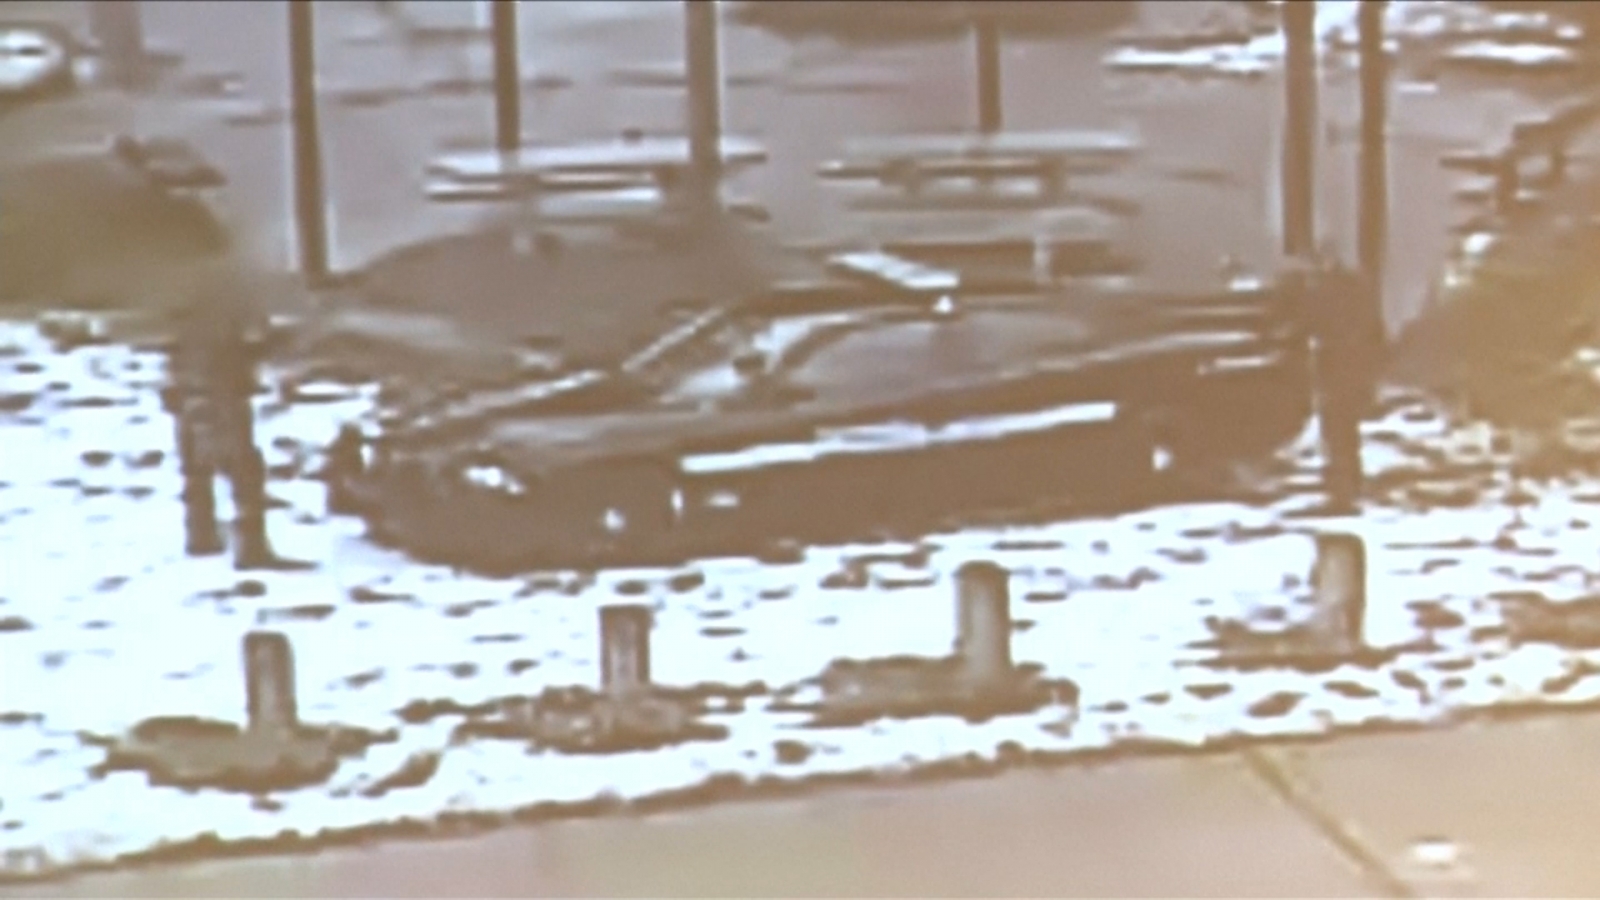 Captures from the Shooting Video Released by Cleveland Police following the November 2014 shooting